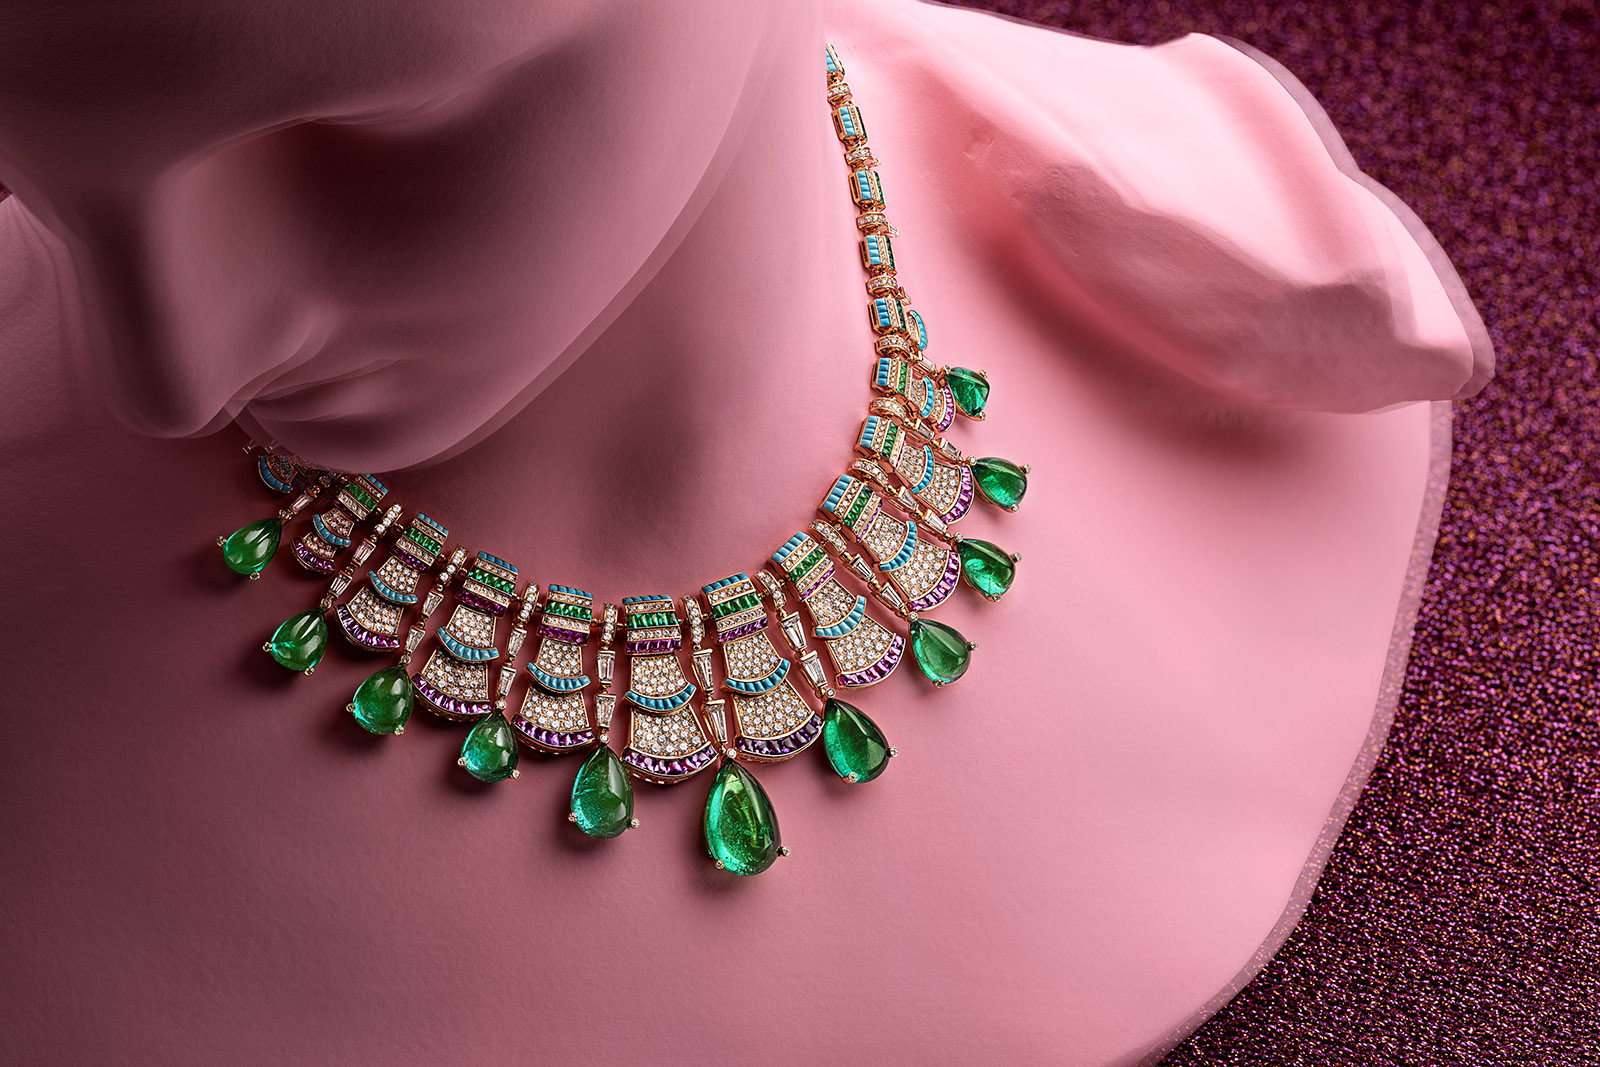 Bvlgari ‘Precious Ruffles’ necklace from ‘Roaring 80s’ line in 65.44ct drop cut Zambian emeralds, amethysts, emeralds, turquoise, and diamonds